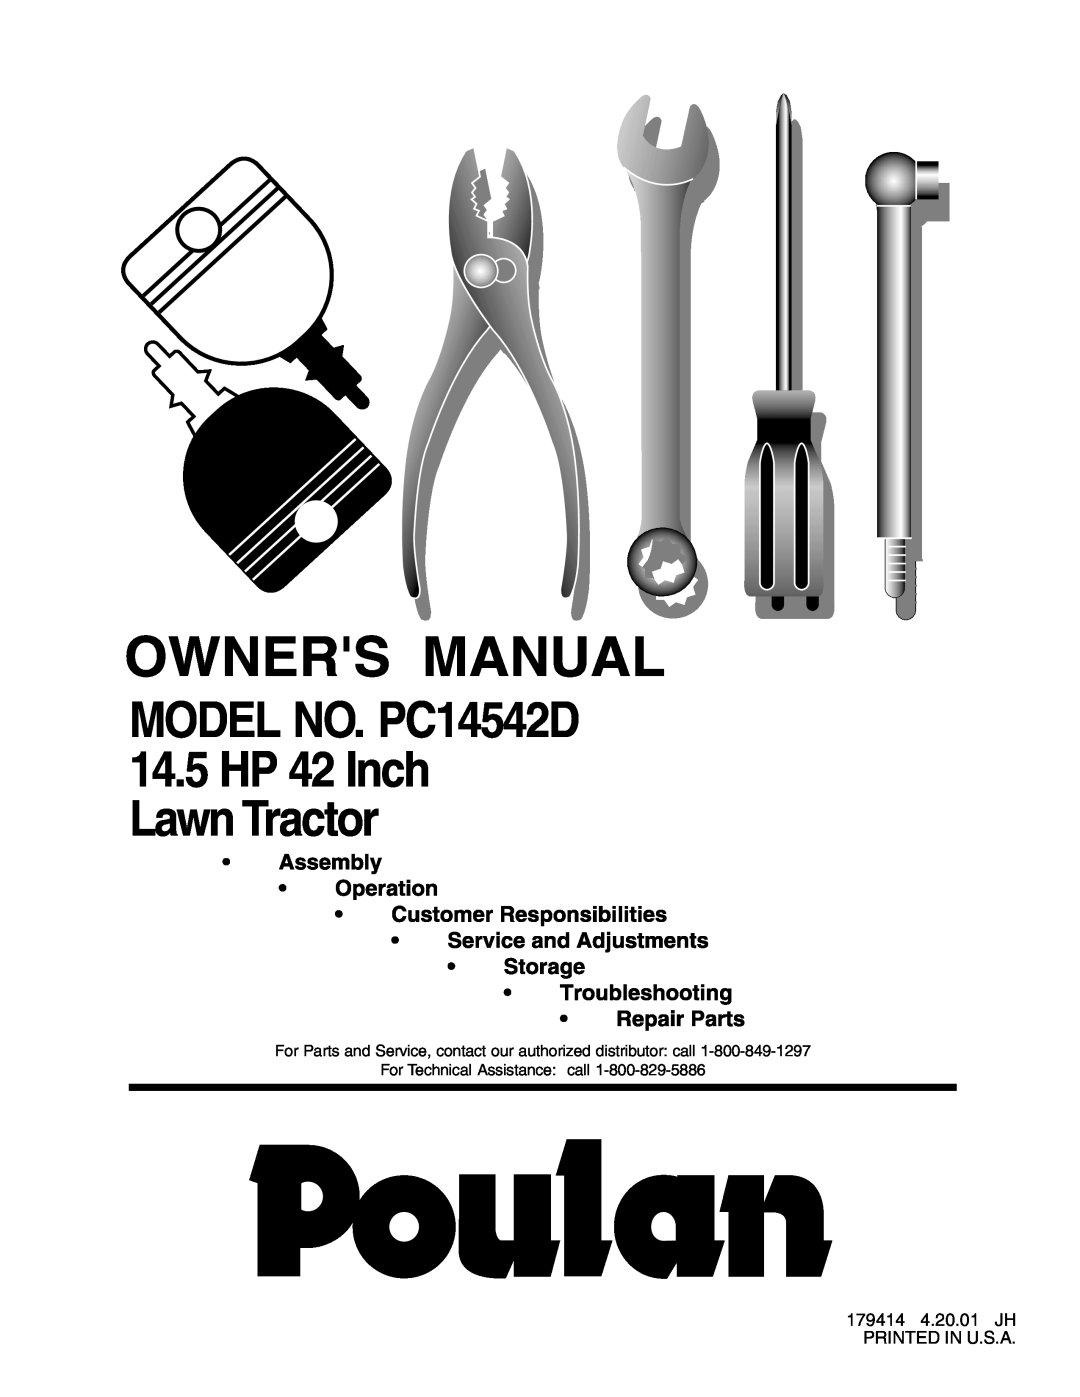 Poulan owner manual Owners Manual, MODEL NO. PC14542D 14.5HP 42 Inch Lawn Tractor 